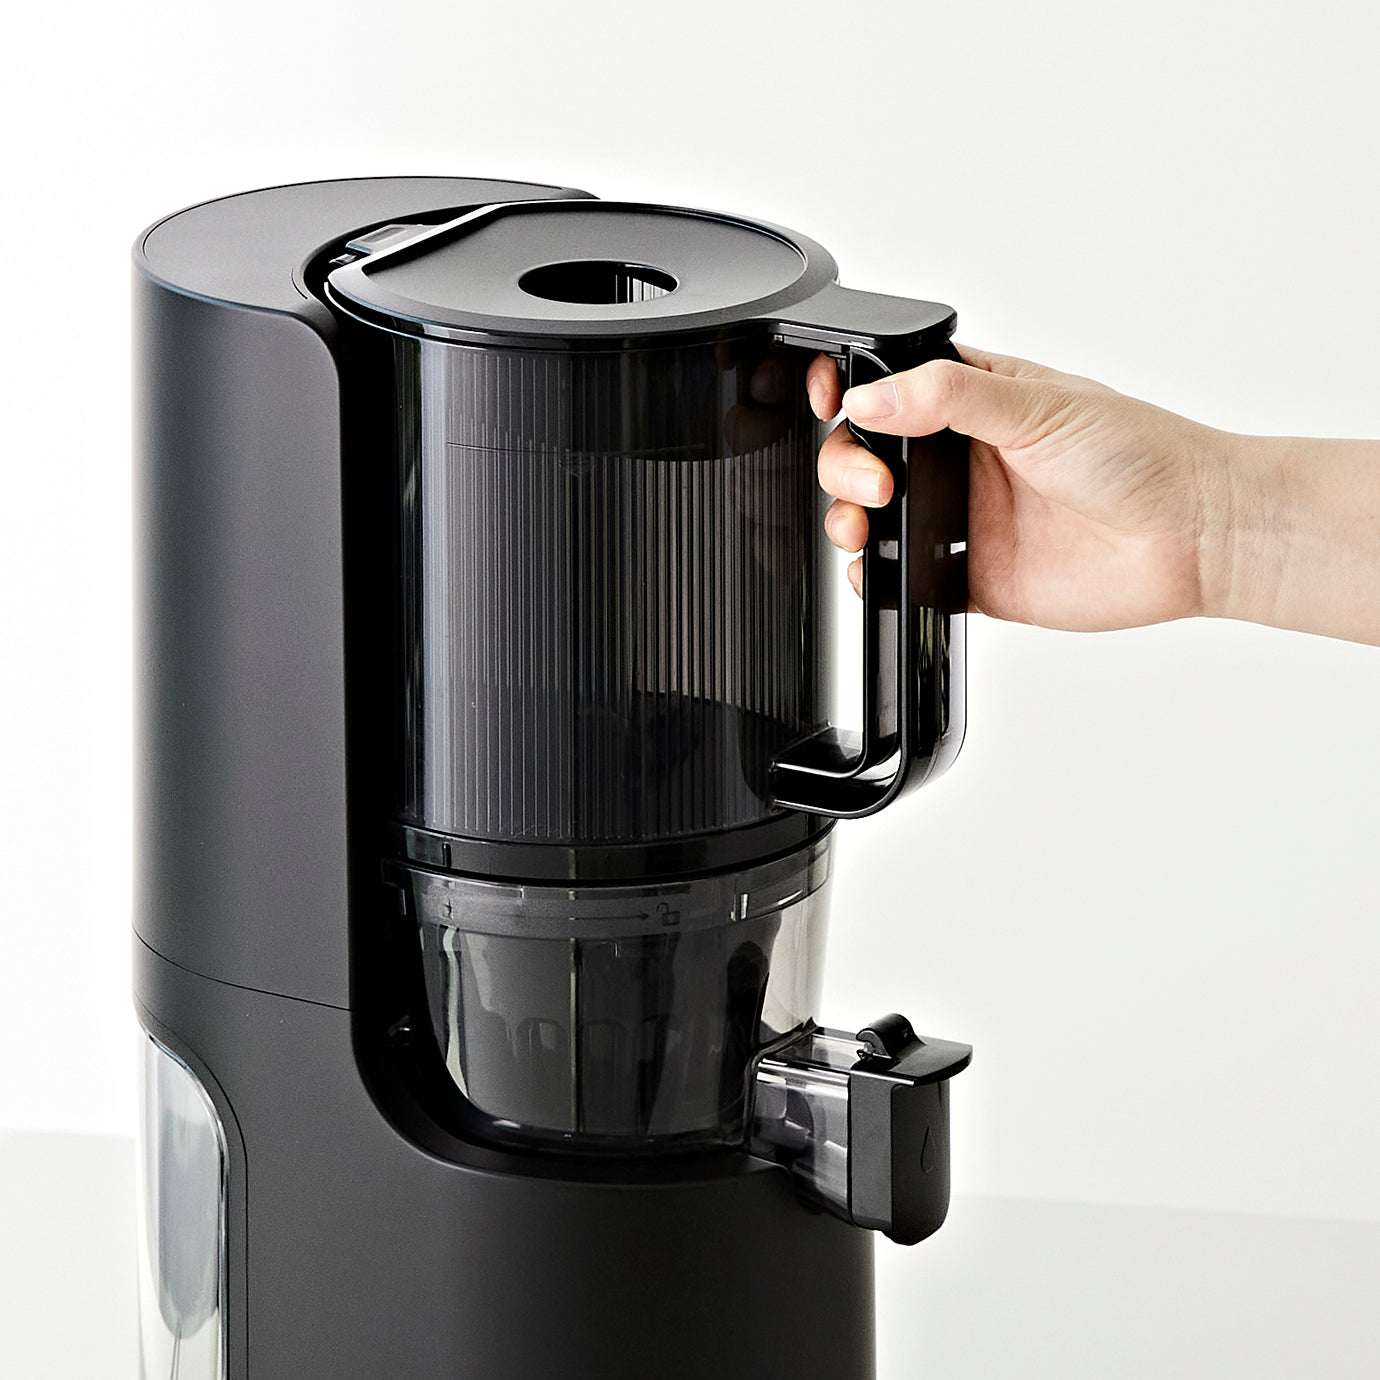 Hurom H200 Easy Clean Slow Juicer: The Best Juicer on the Market 